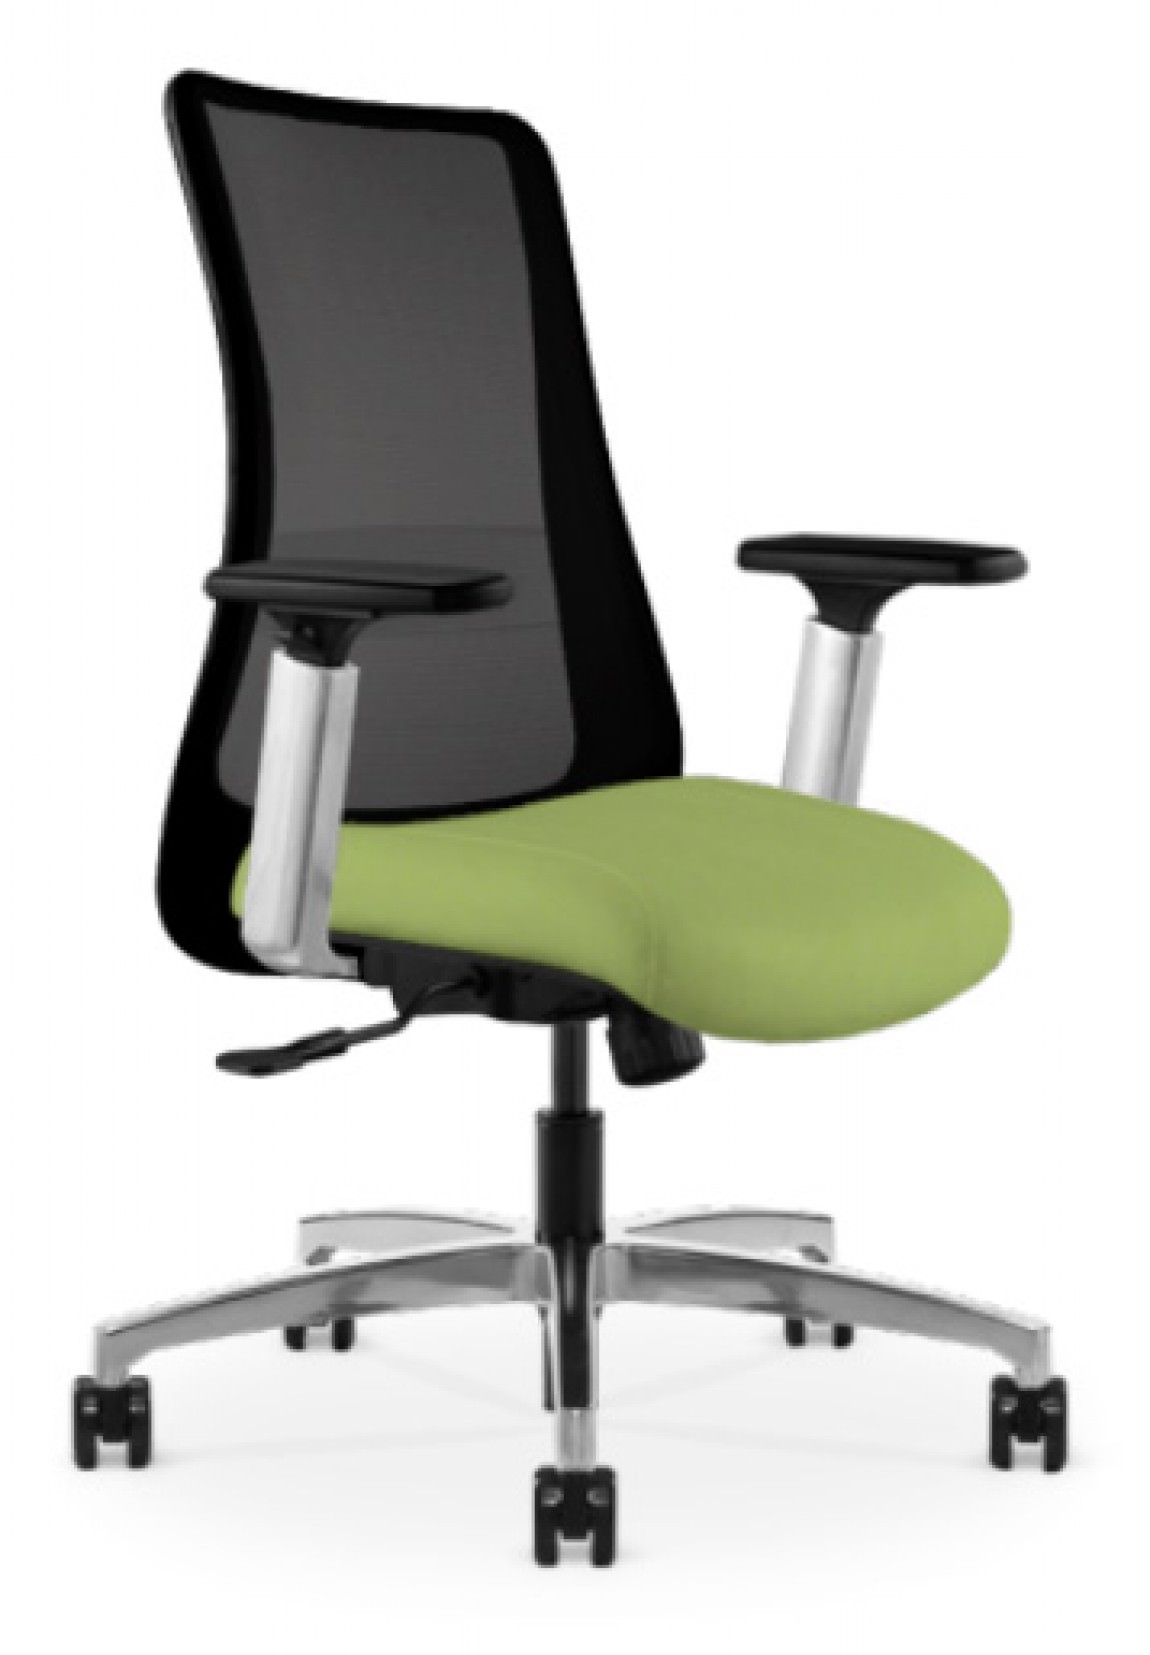 Genie Black Copper Mesh Office Chair - Polished Aluminum - Staple Smith